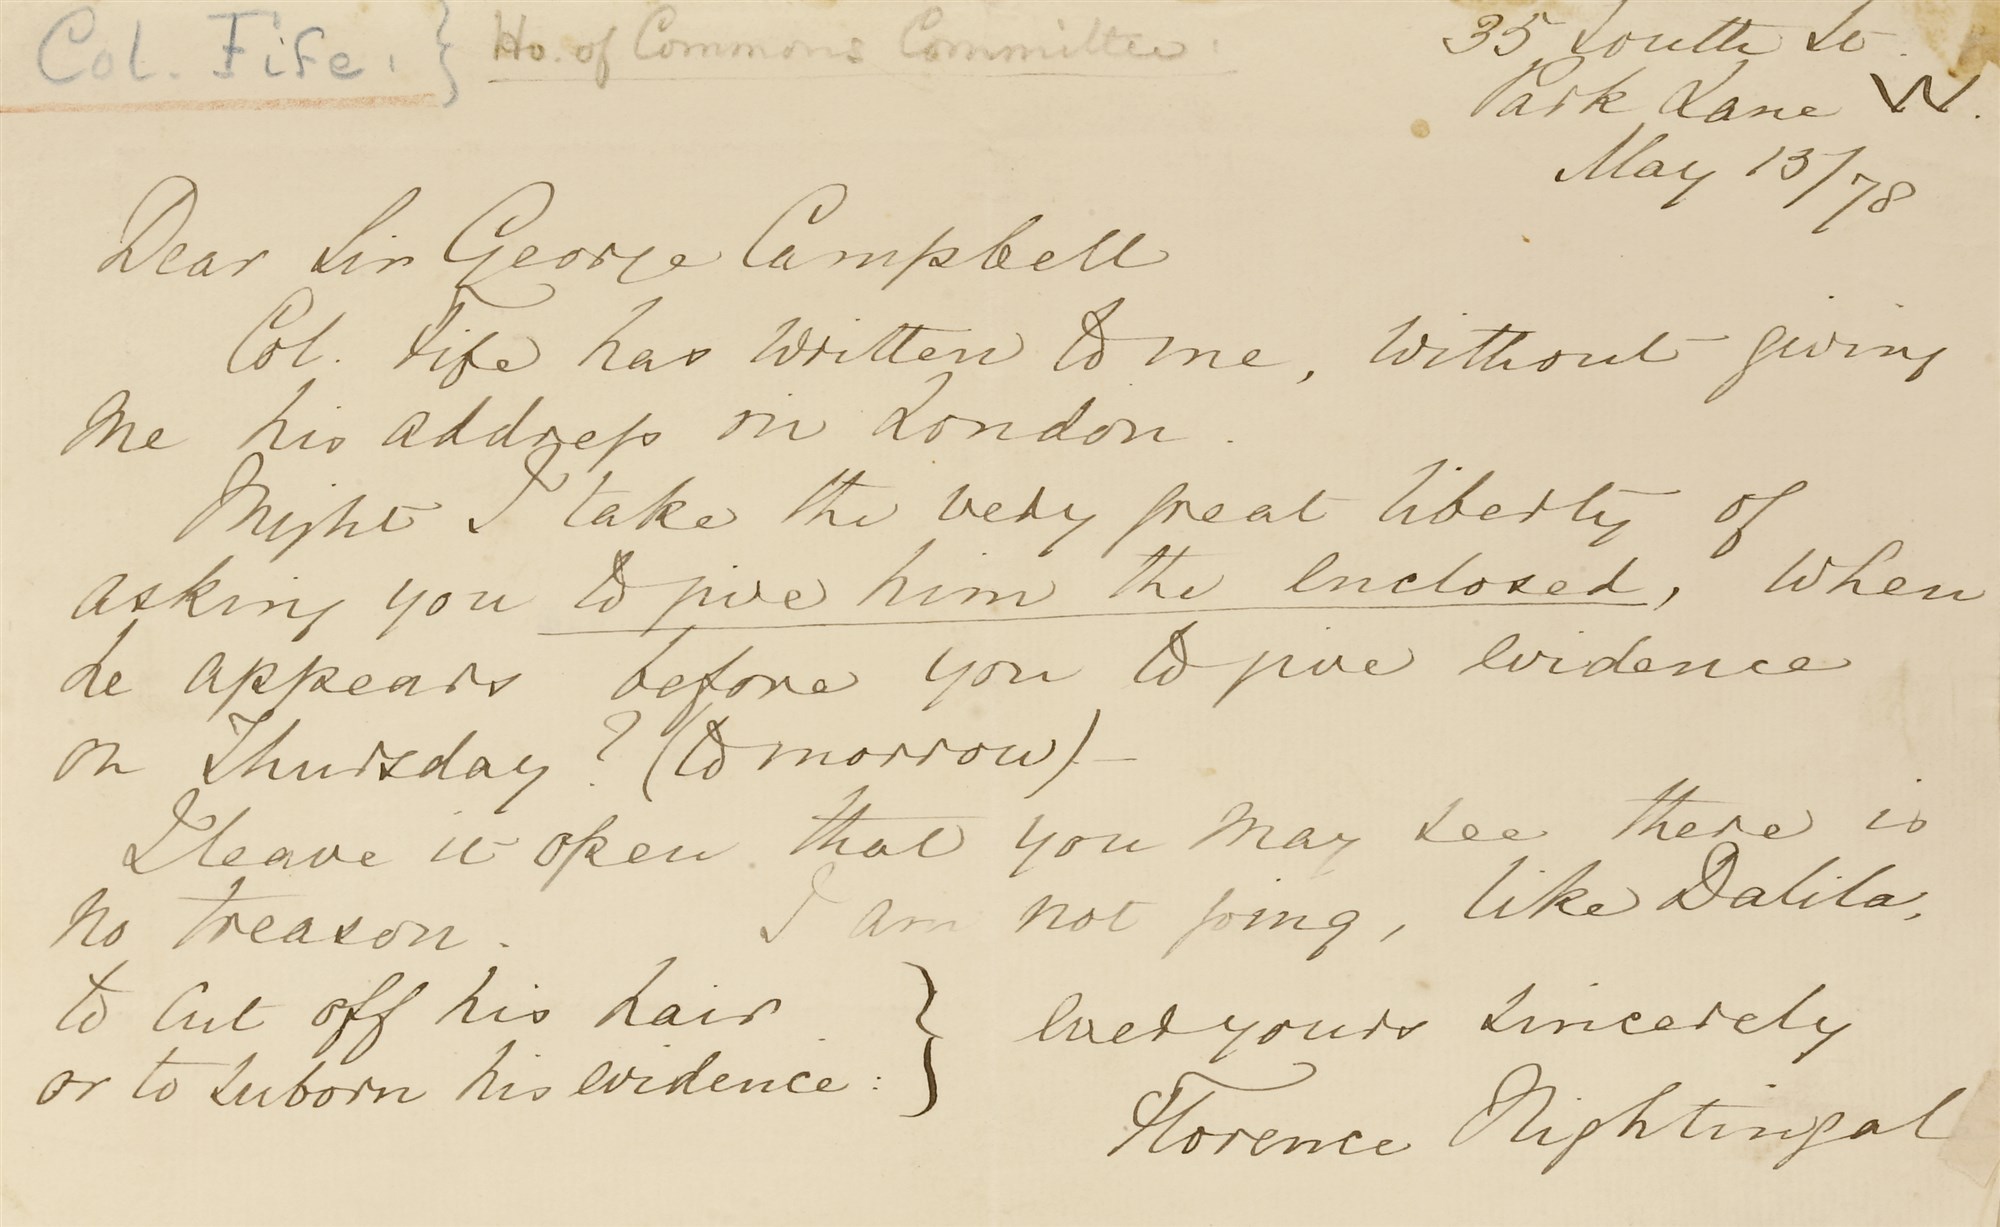 Autographed letter from Florence Nightingale